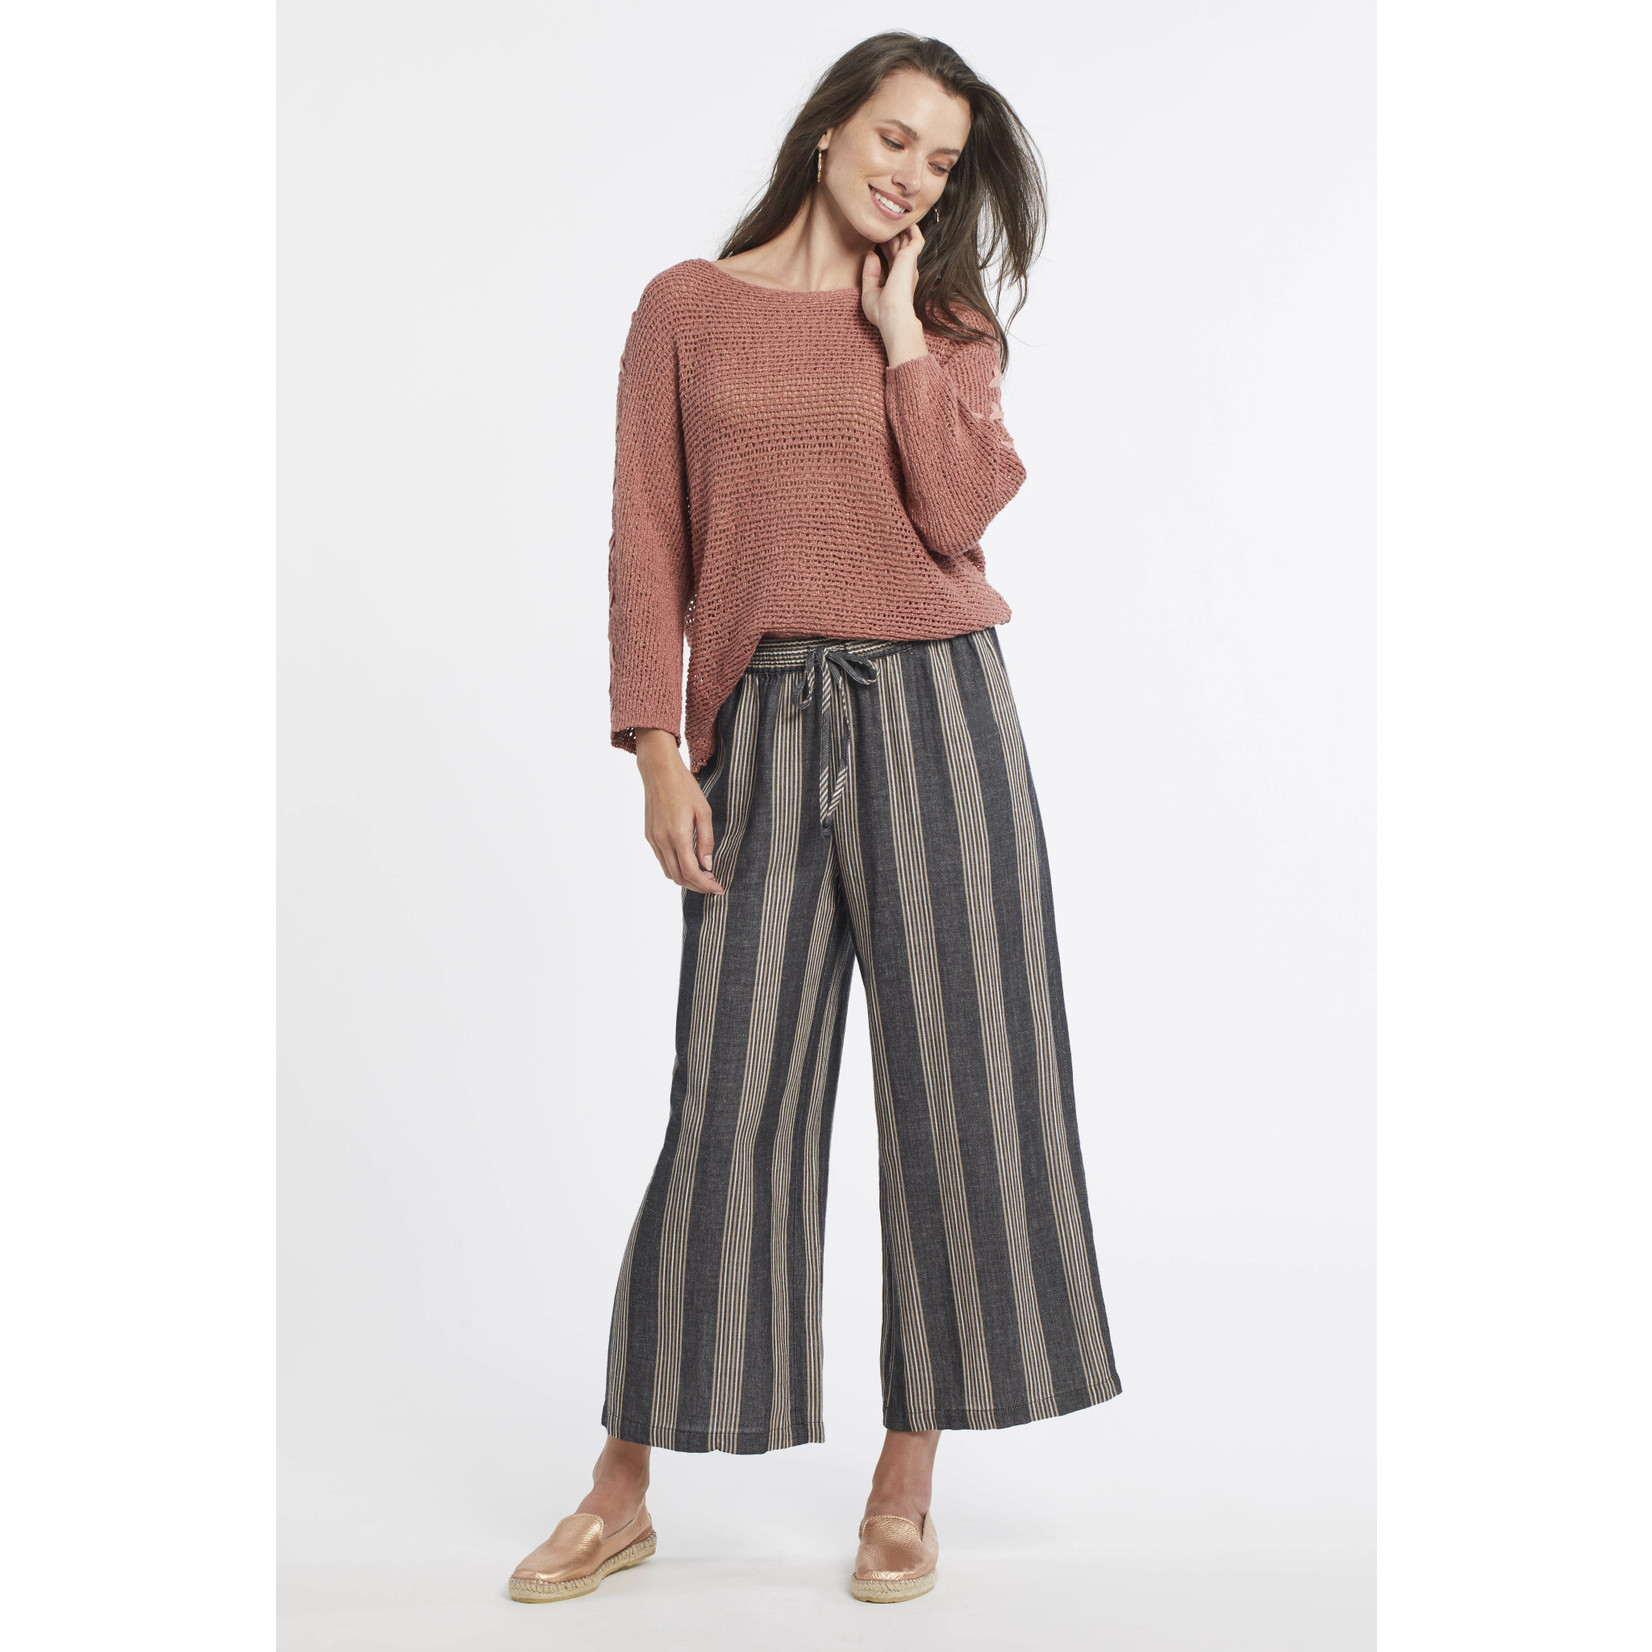 Tribal Pull On Crop Pant With Elastic Waistband 7329O